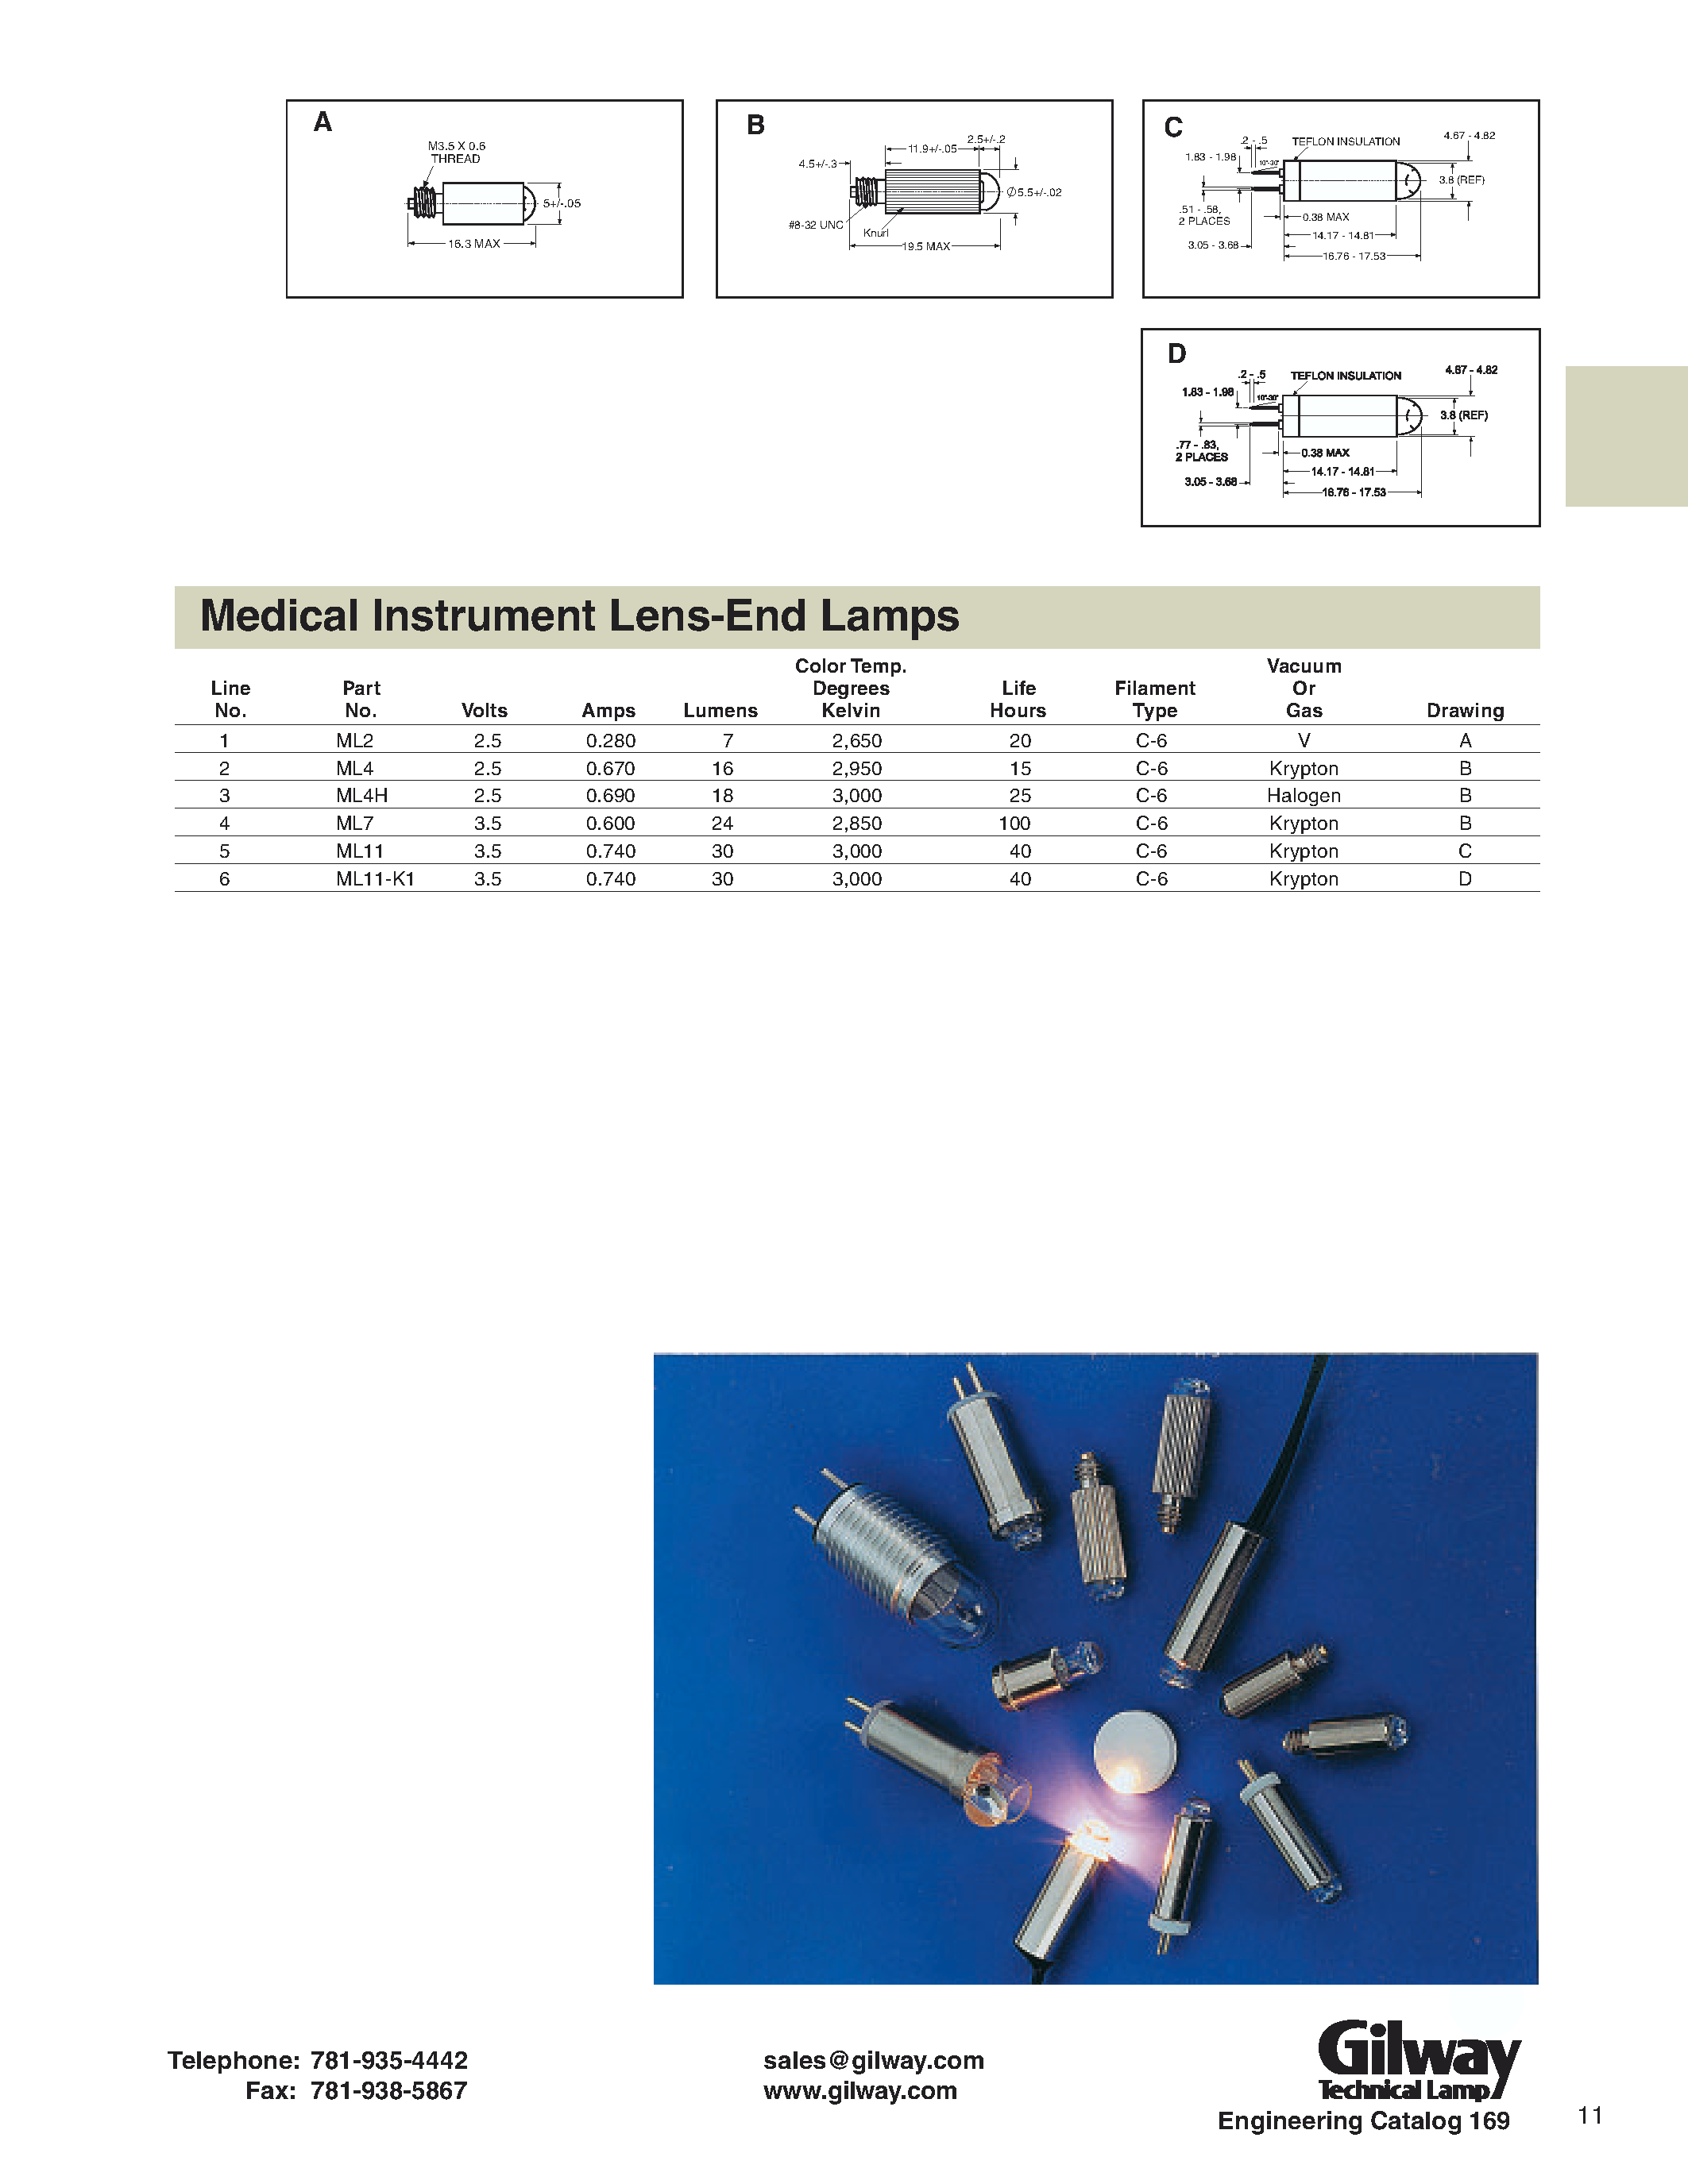 Datasheet ML11 - Medical Instrument Lens-End Lamps page 1